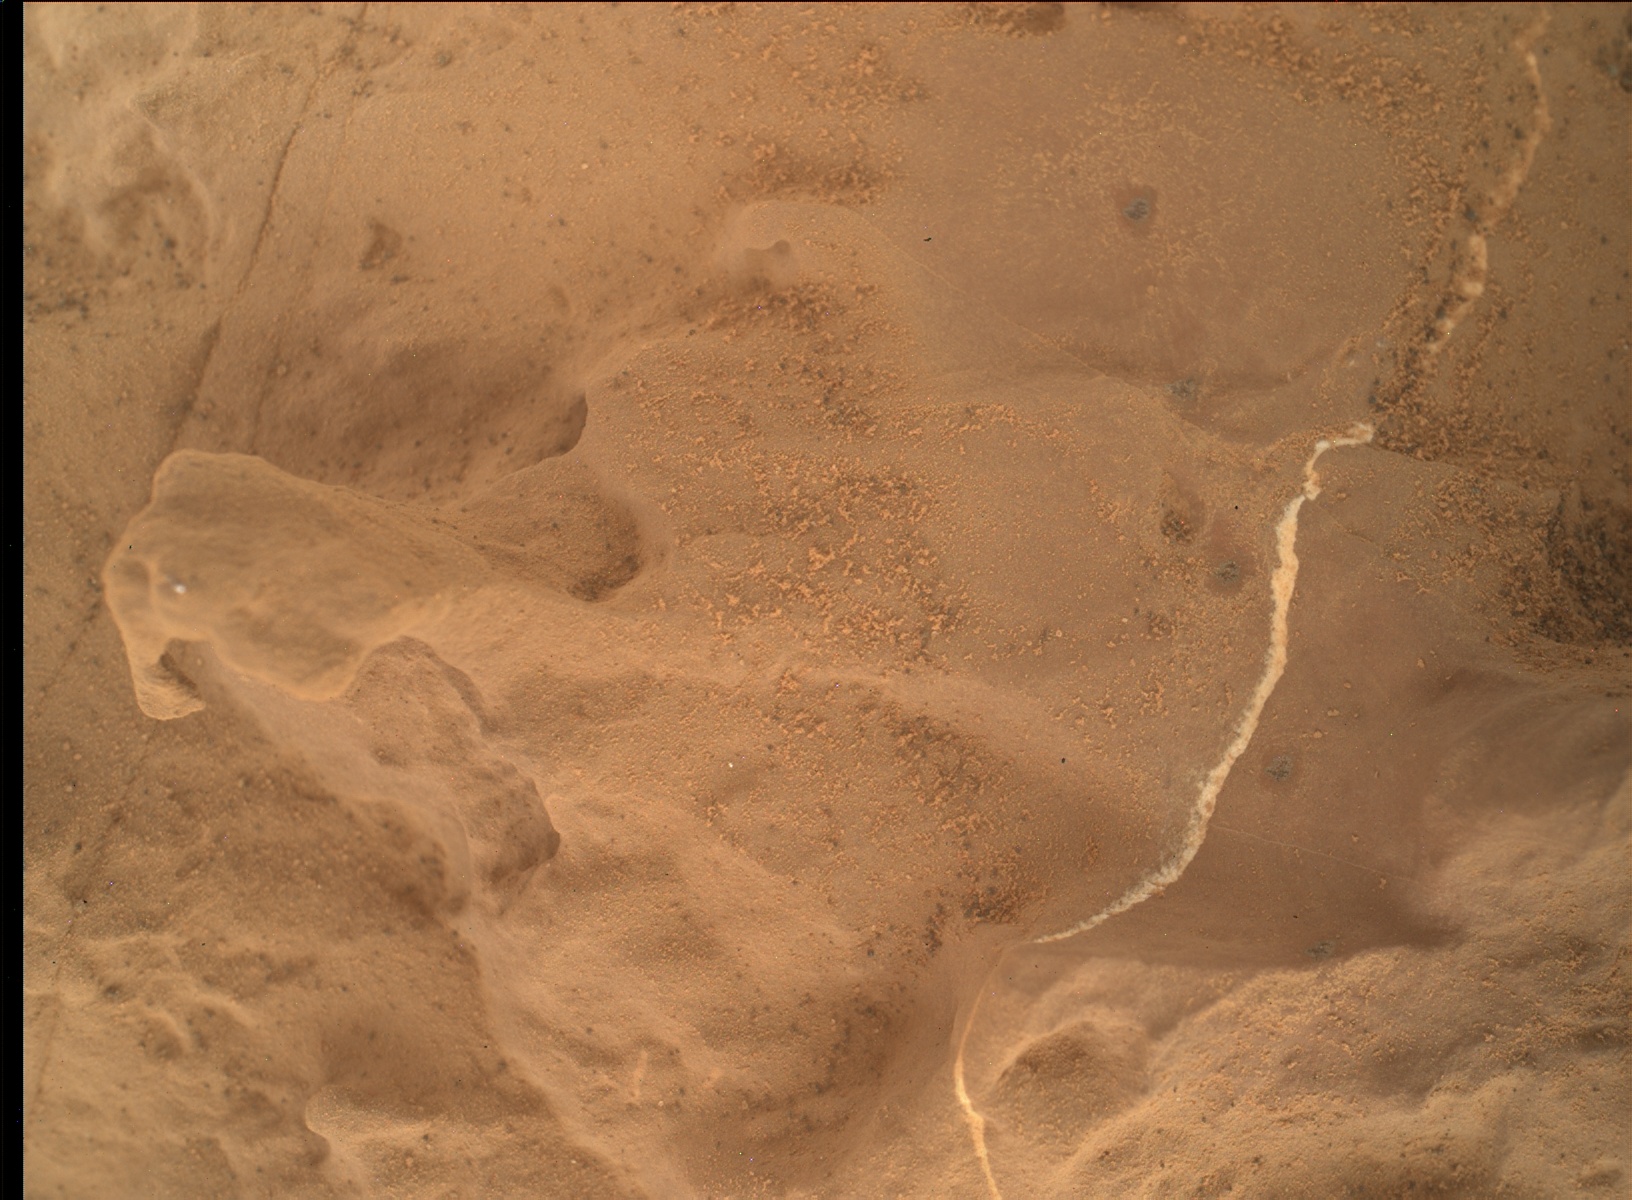 Nasa's Mars rover Curiosity acquired this image using its Mars Hand Lens Imager (MAHLI) on Sol 1838